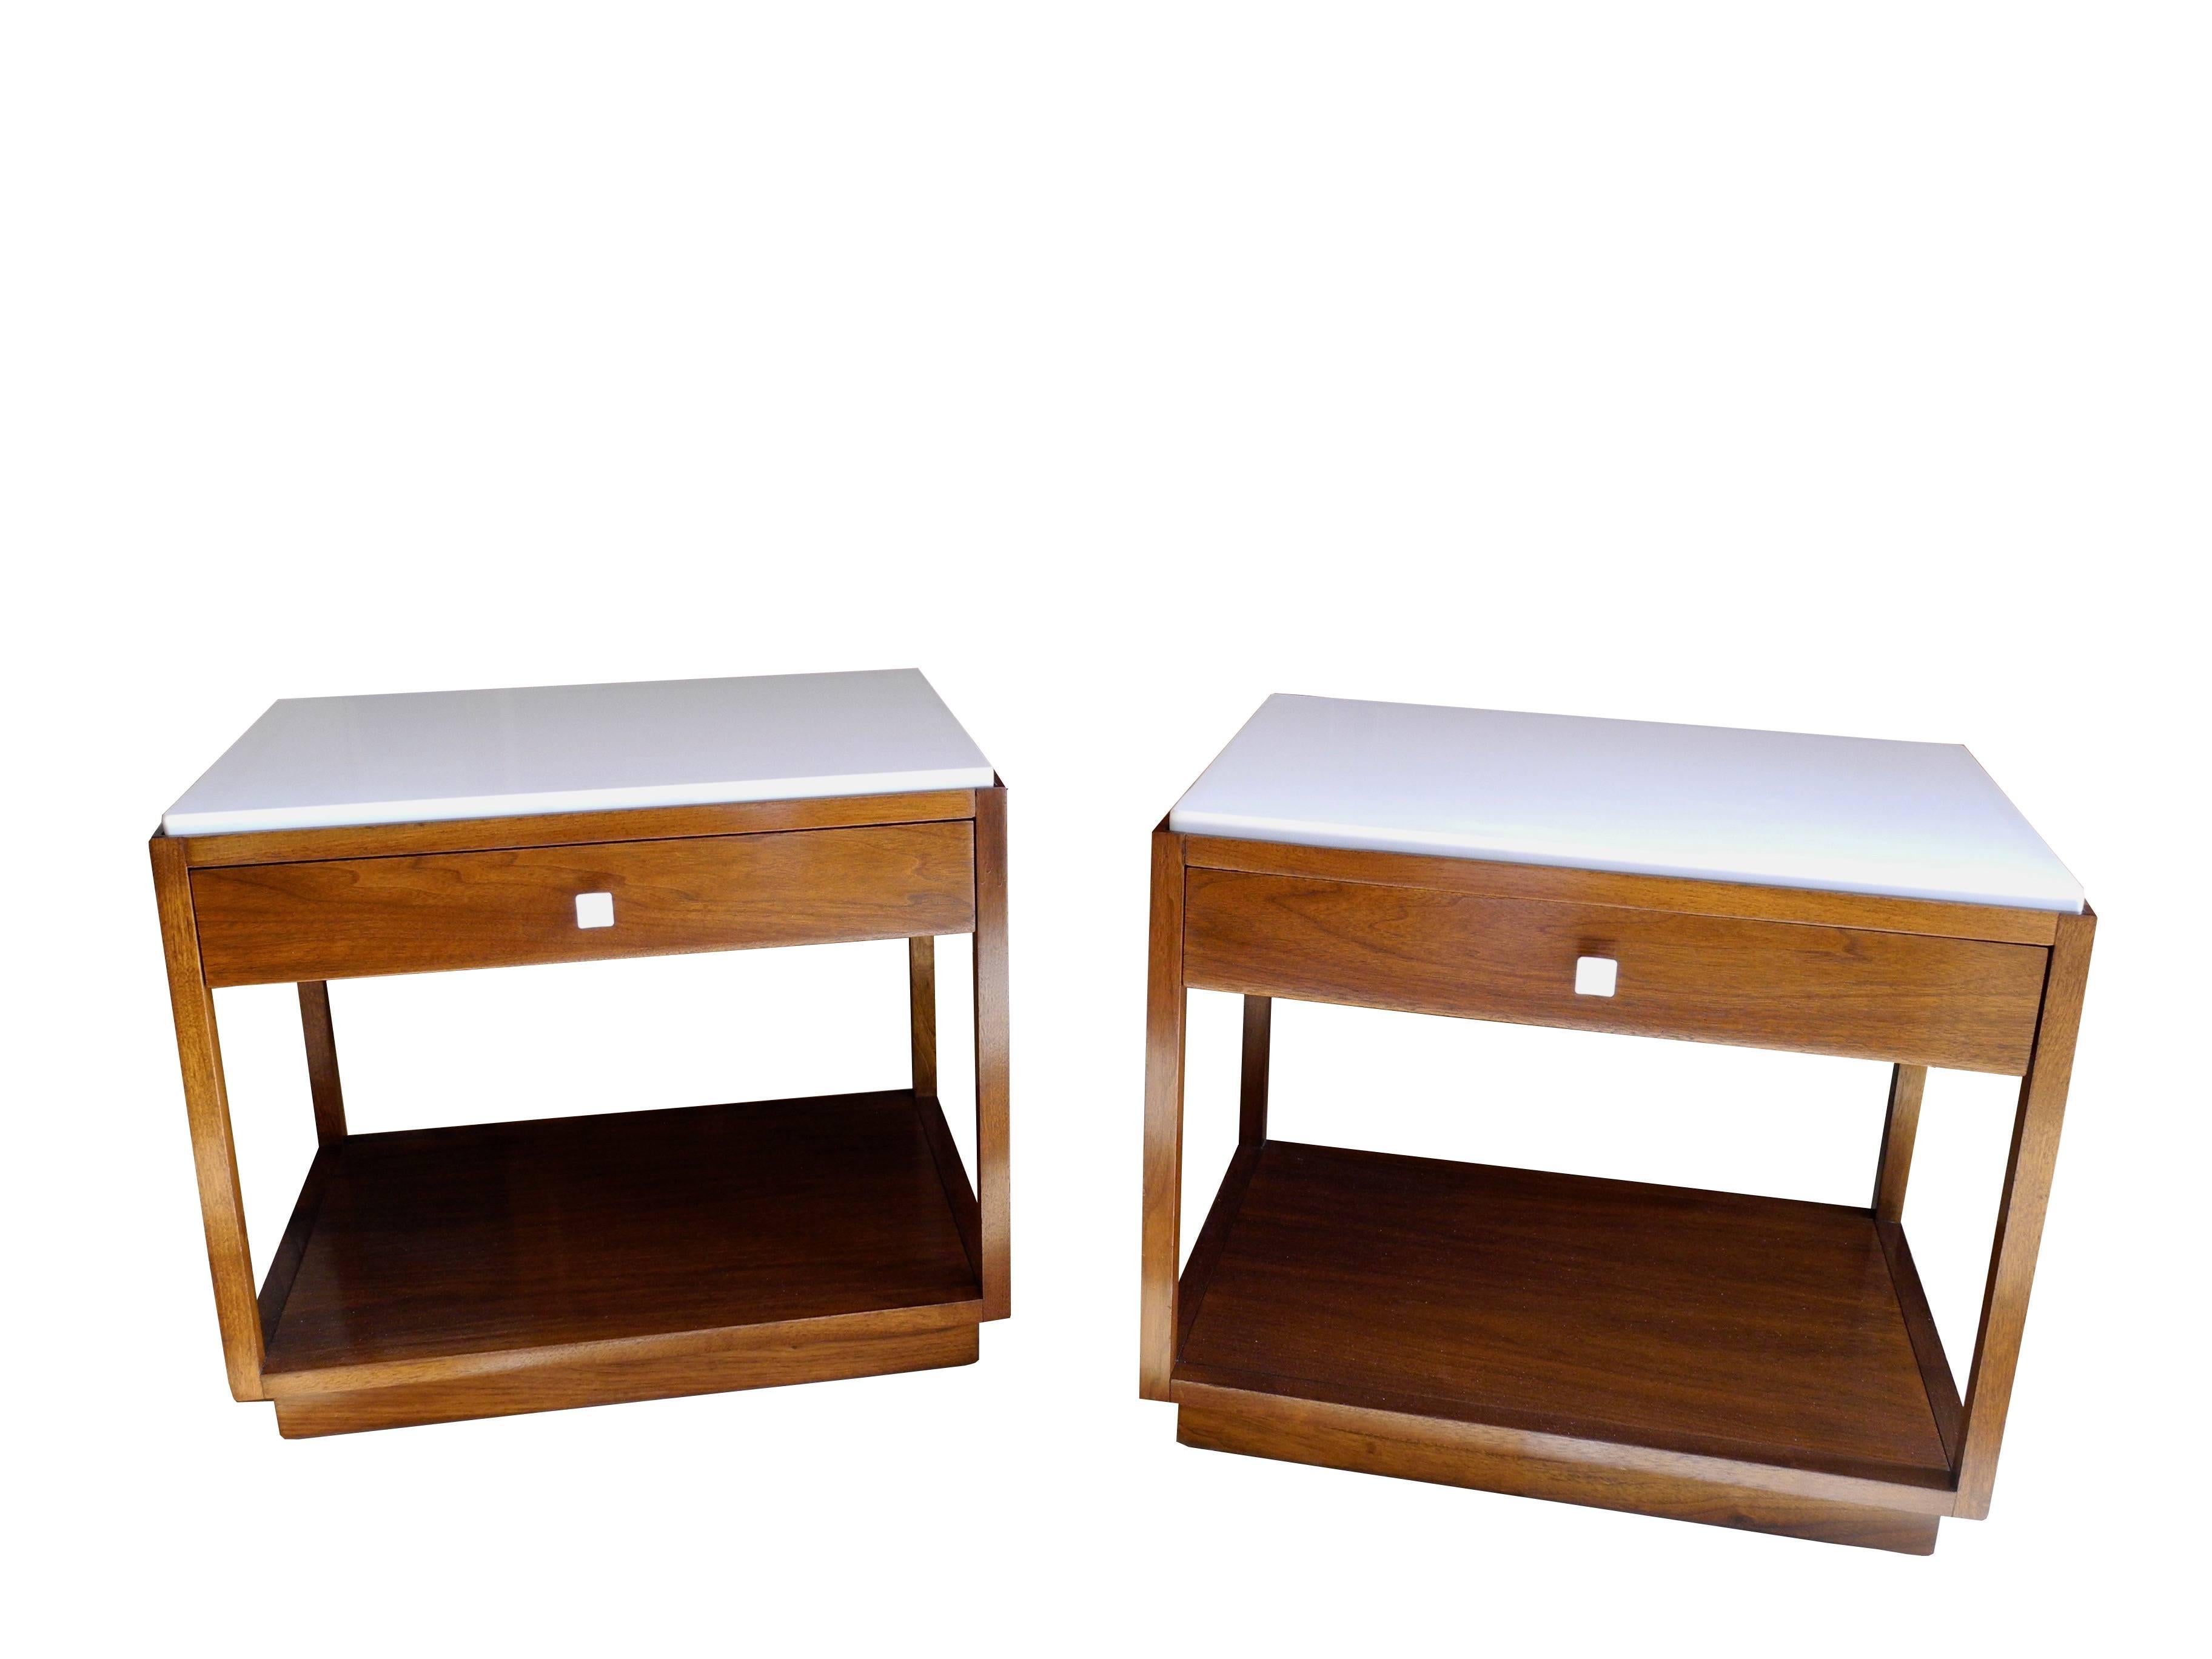 Quartz Mid-Century Modern Pair of Nightstands by Milo Baughman for Directional